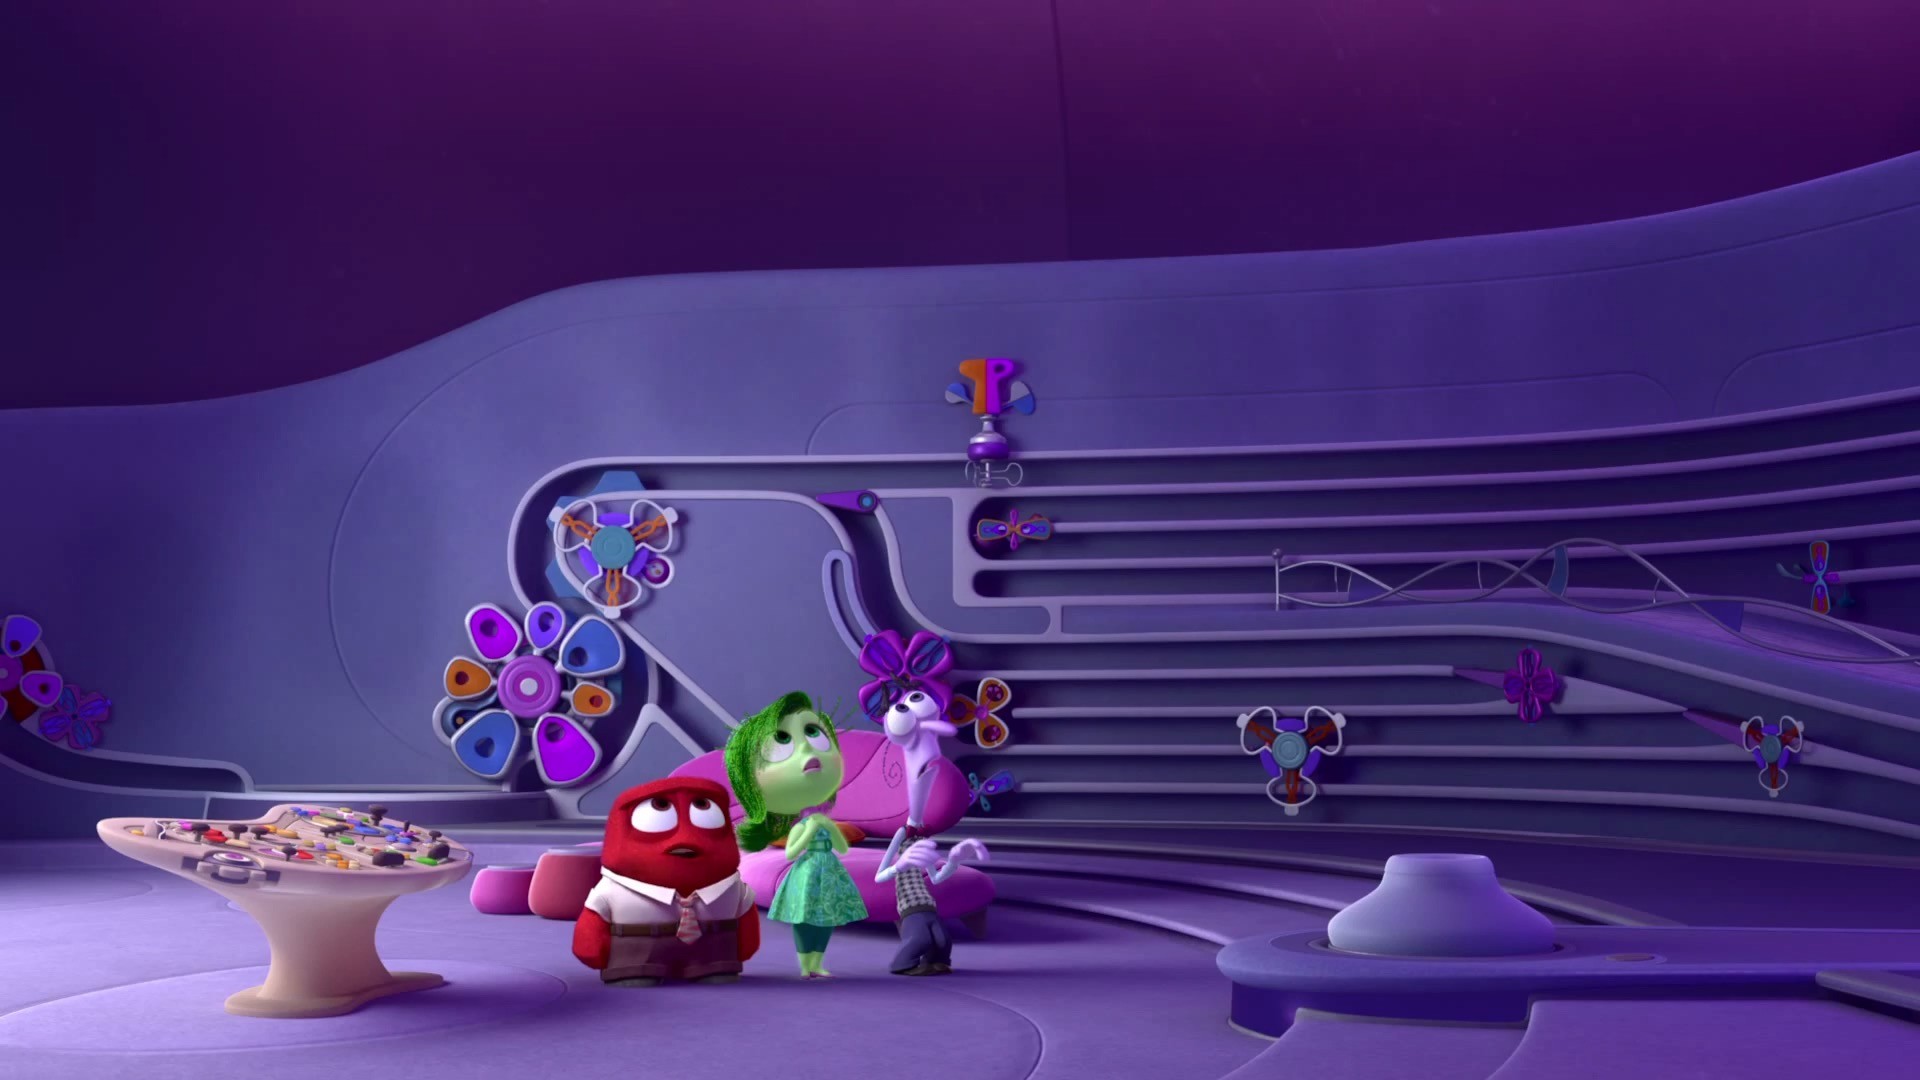 1920x1080 206 best Disney: Inside Out images on Pinterest | Disney movies, Disney  stuff and Bing bong